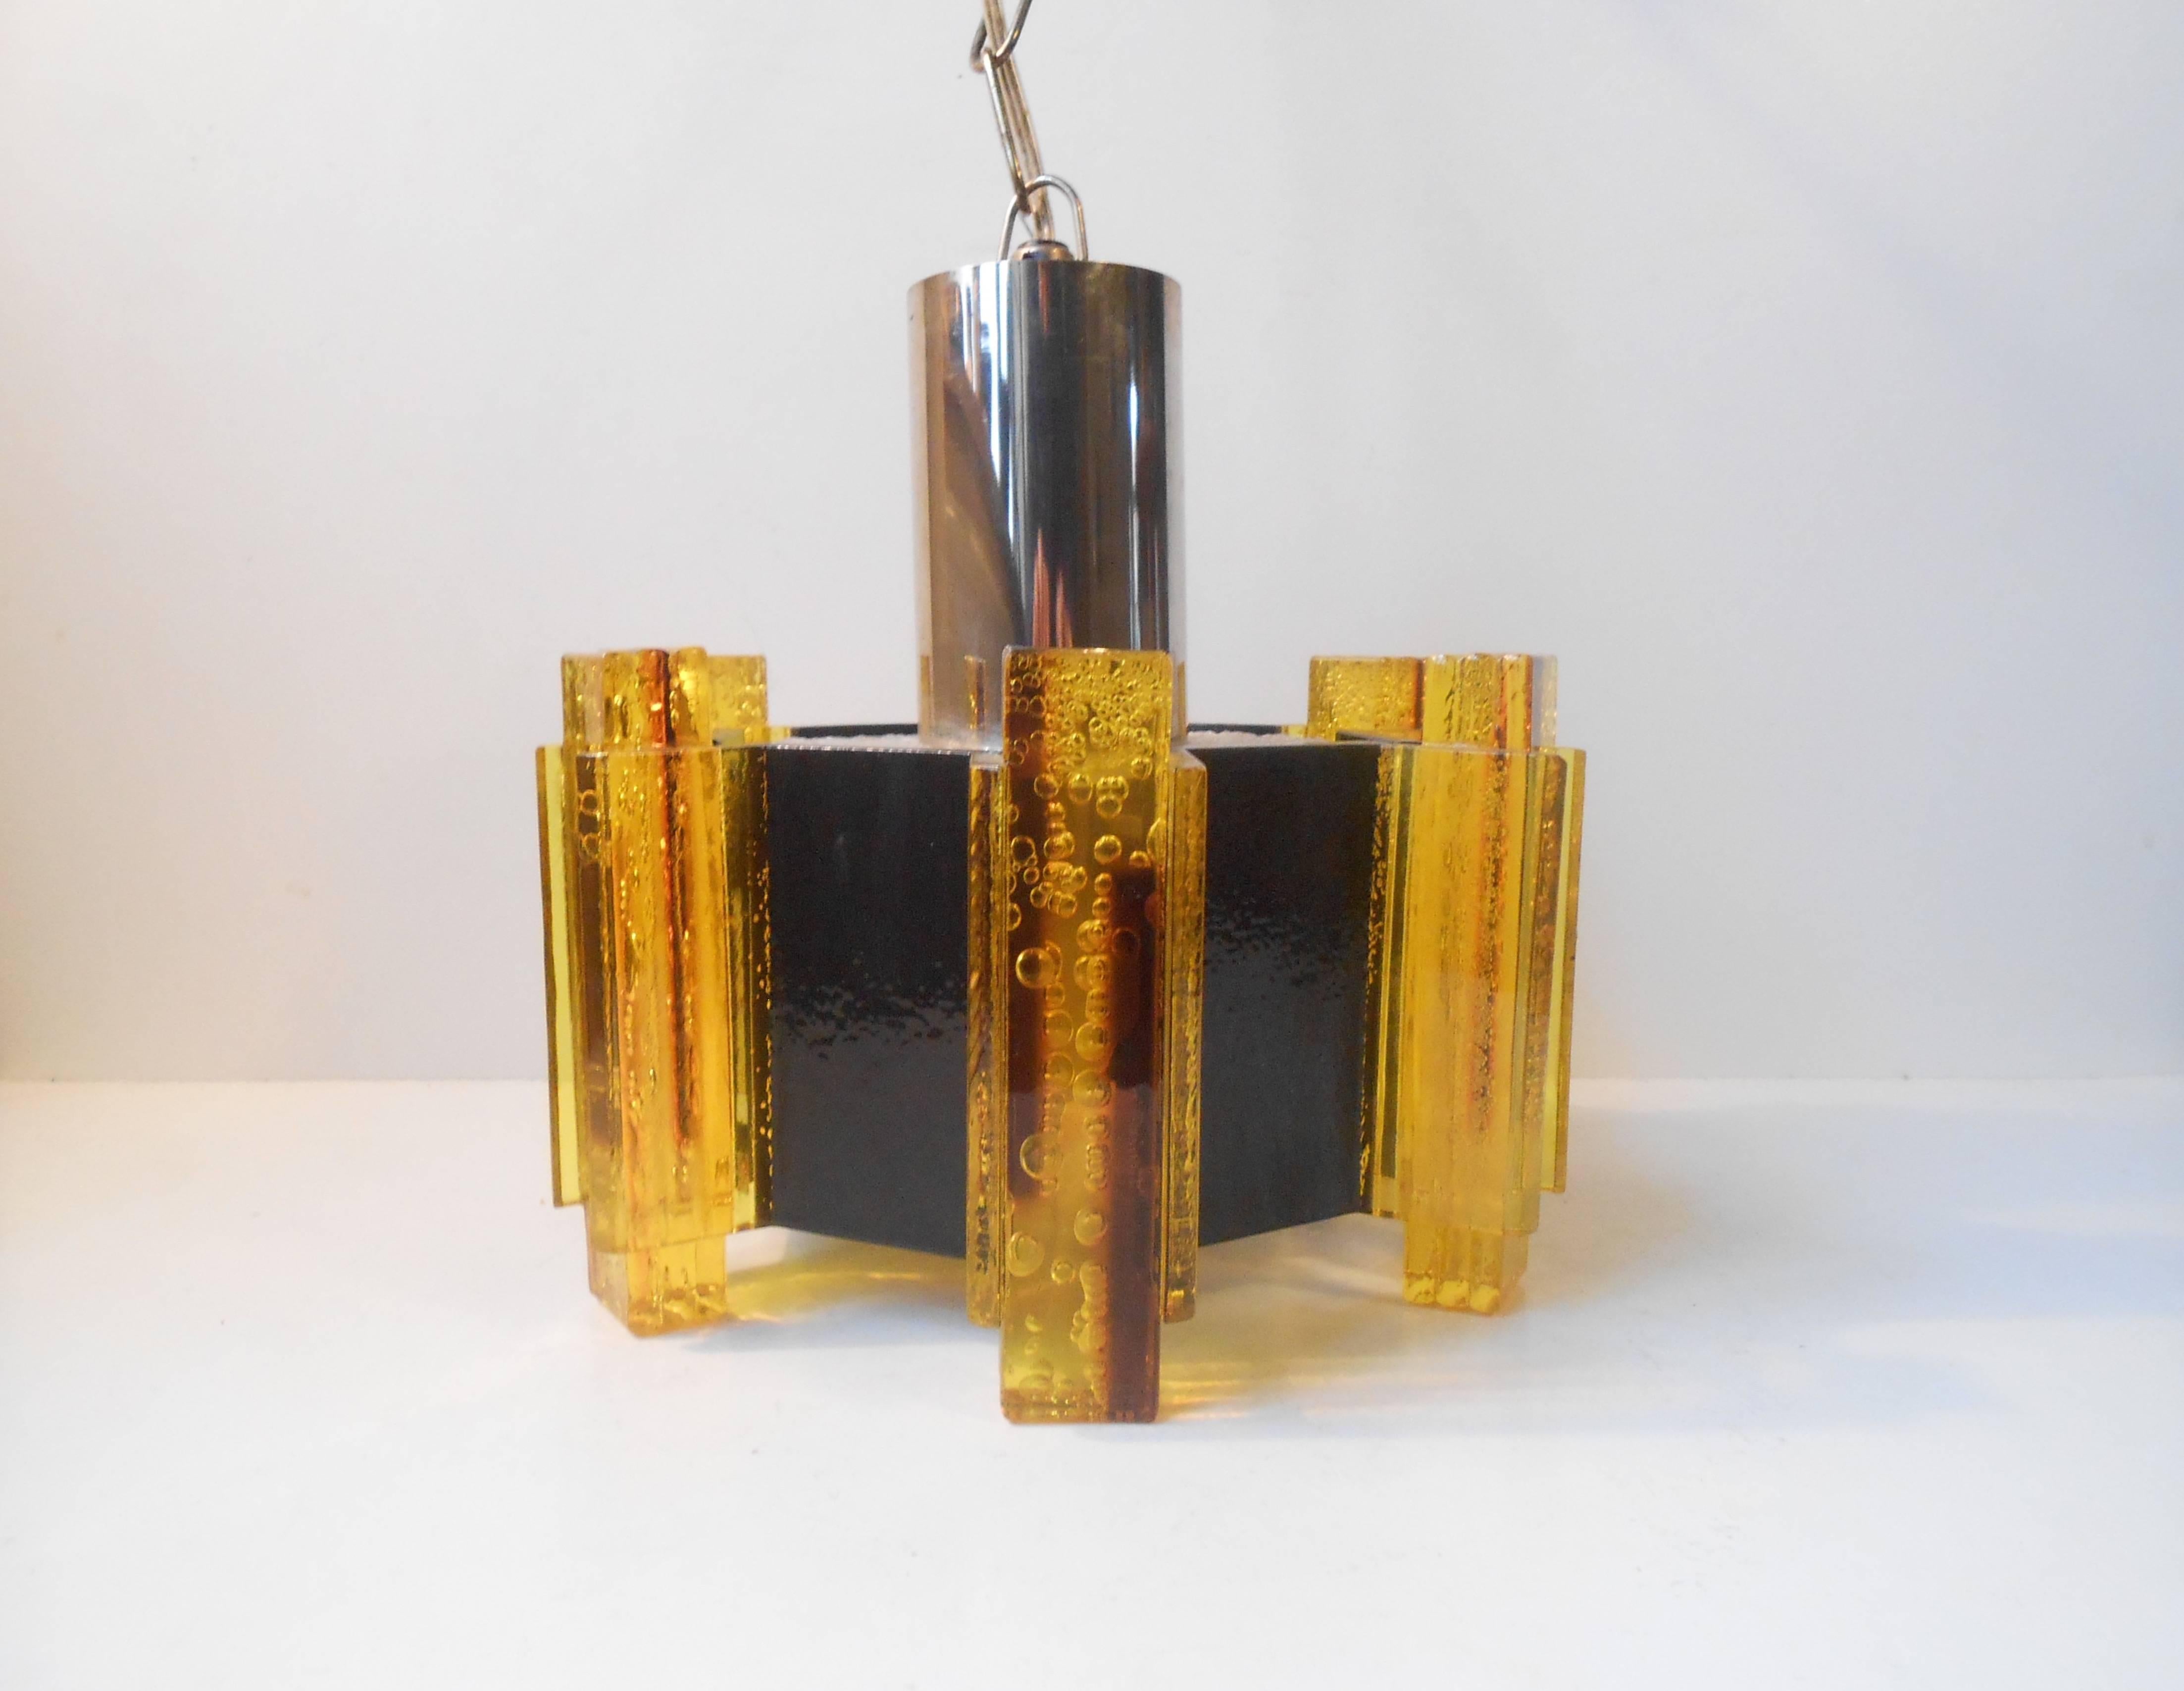 Polished Danish Space Age Ceiling Light by Claus Bolby for Cebo, 1970s For Sale